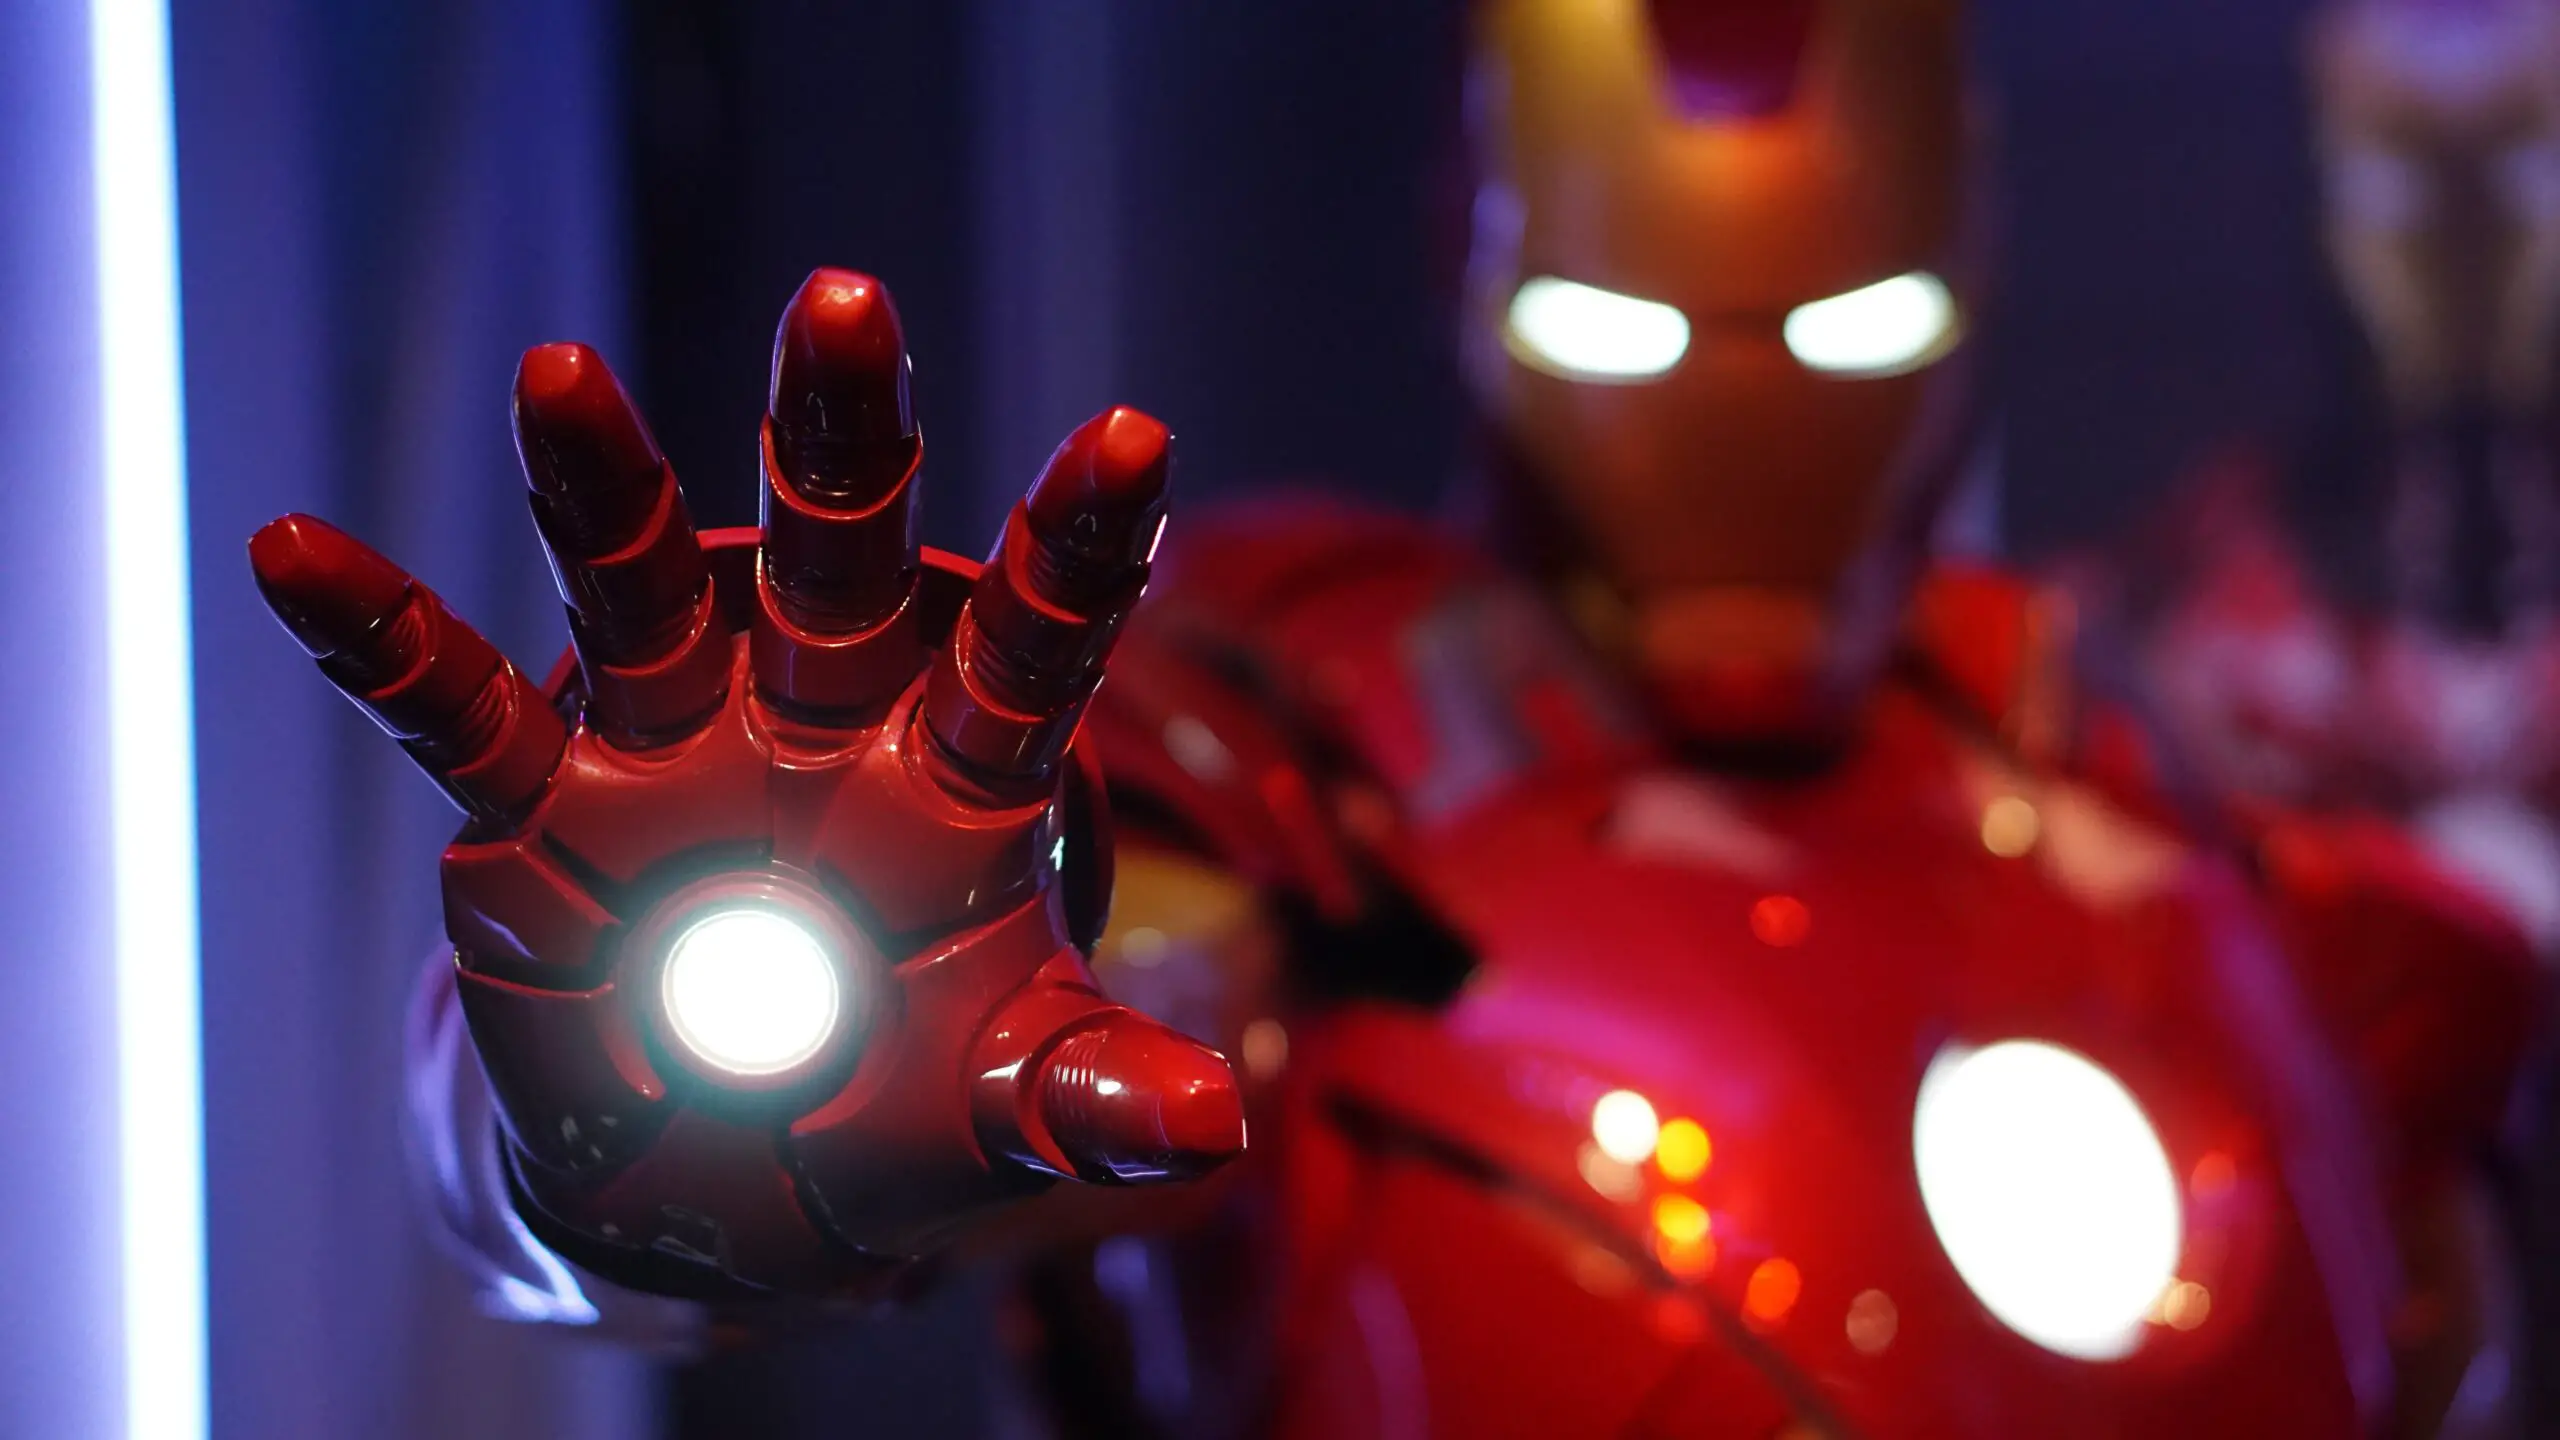 Who is the villain in iron man?